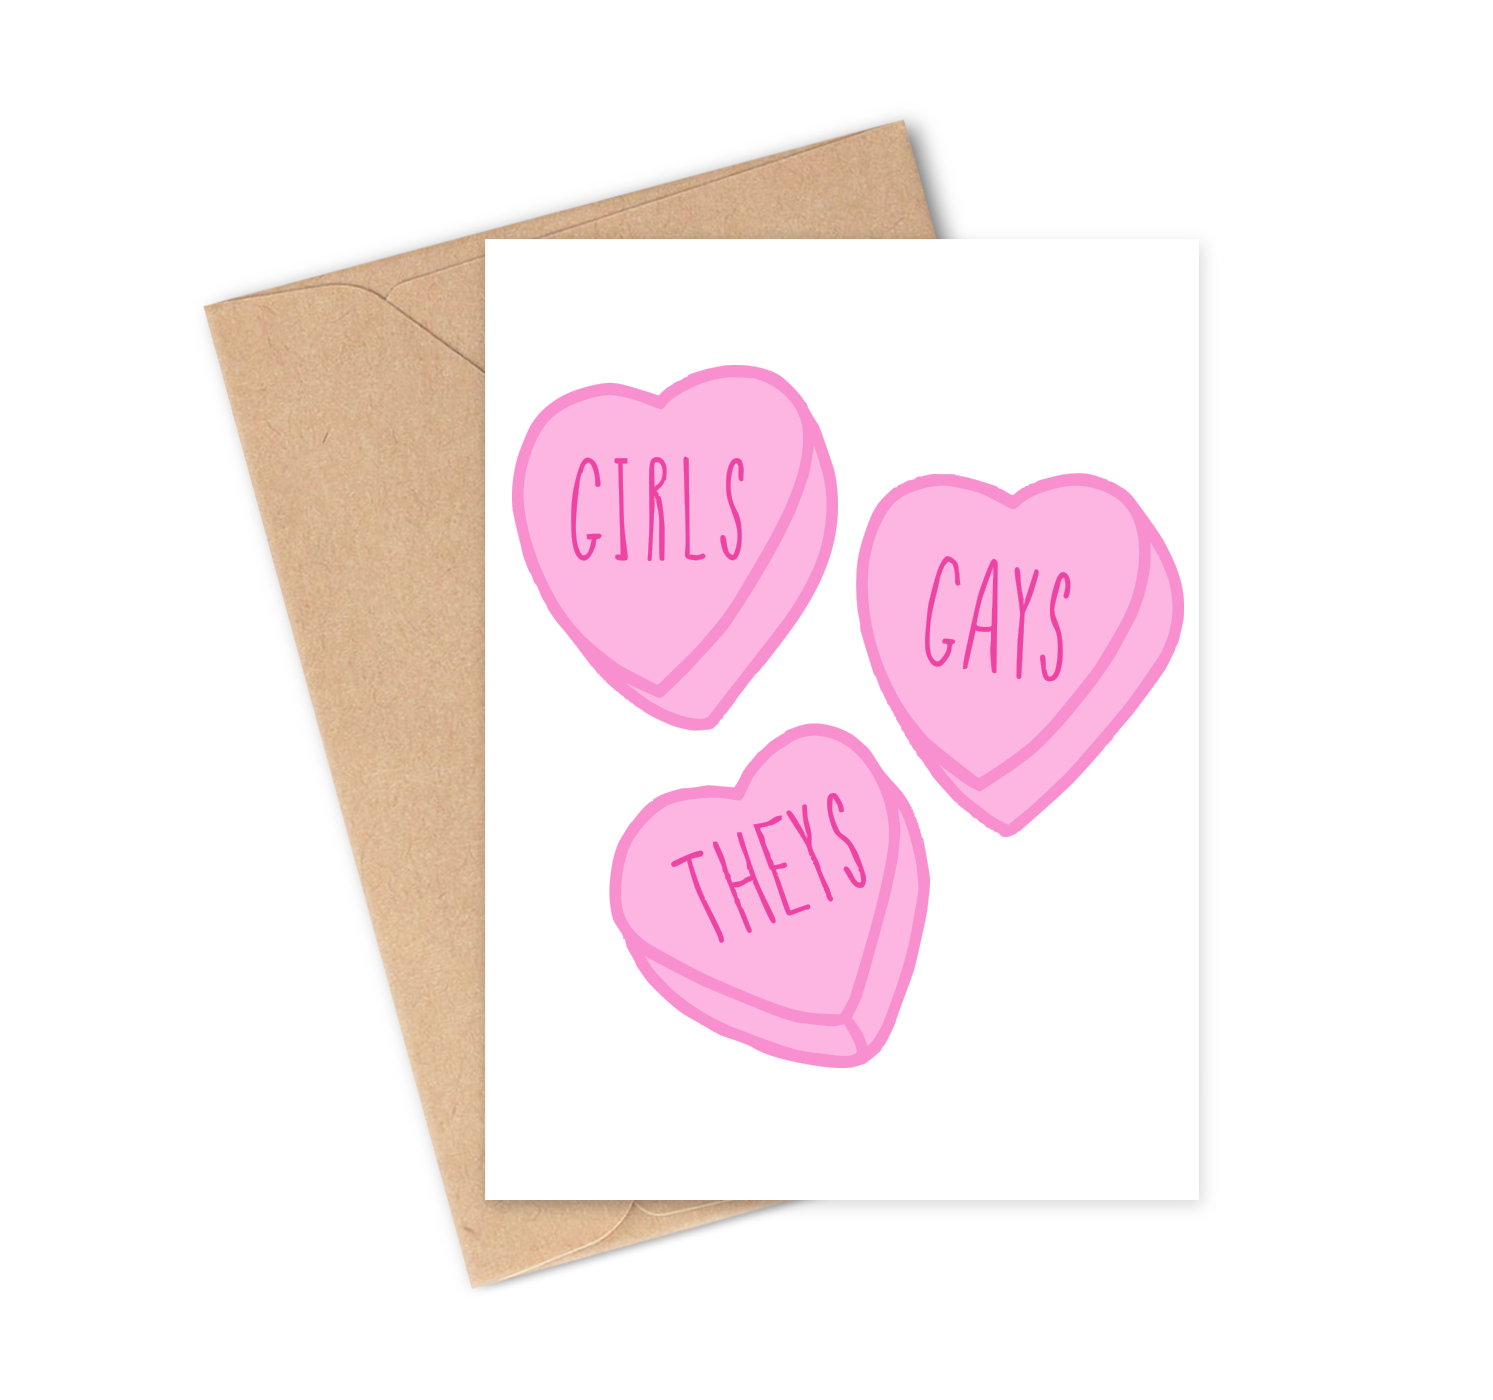 Girls, Gays, Theys Heart Lollies Greeting Card with envelope